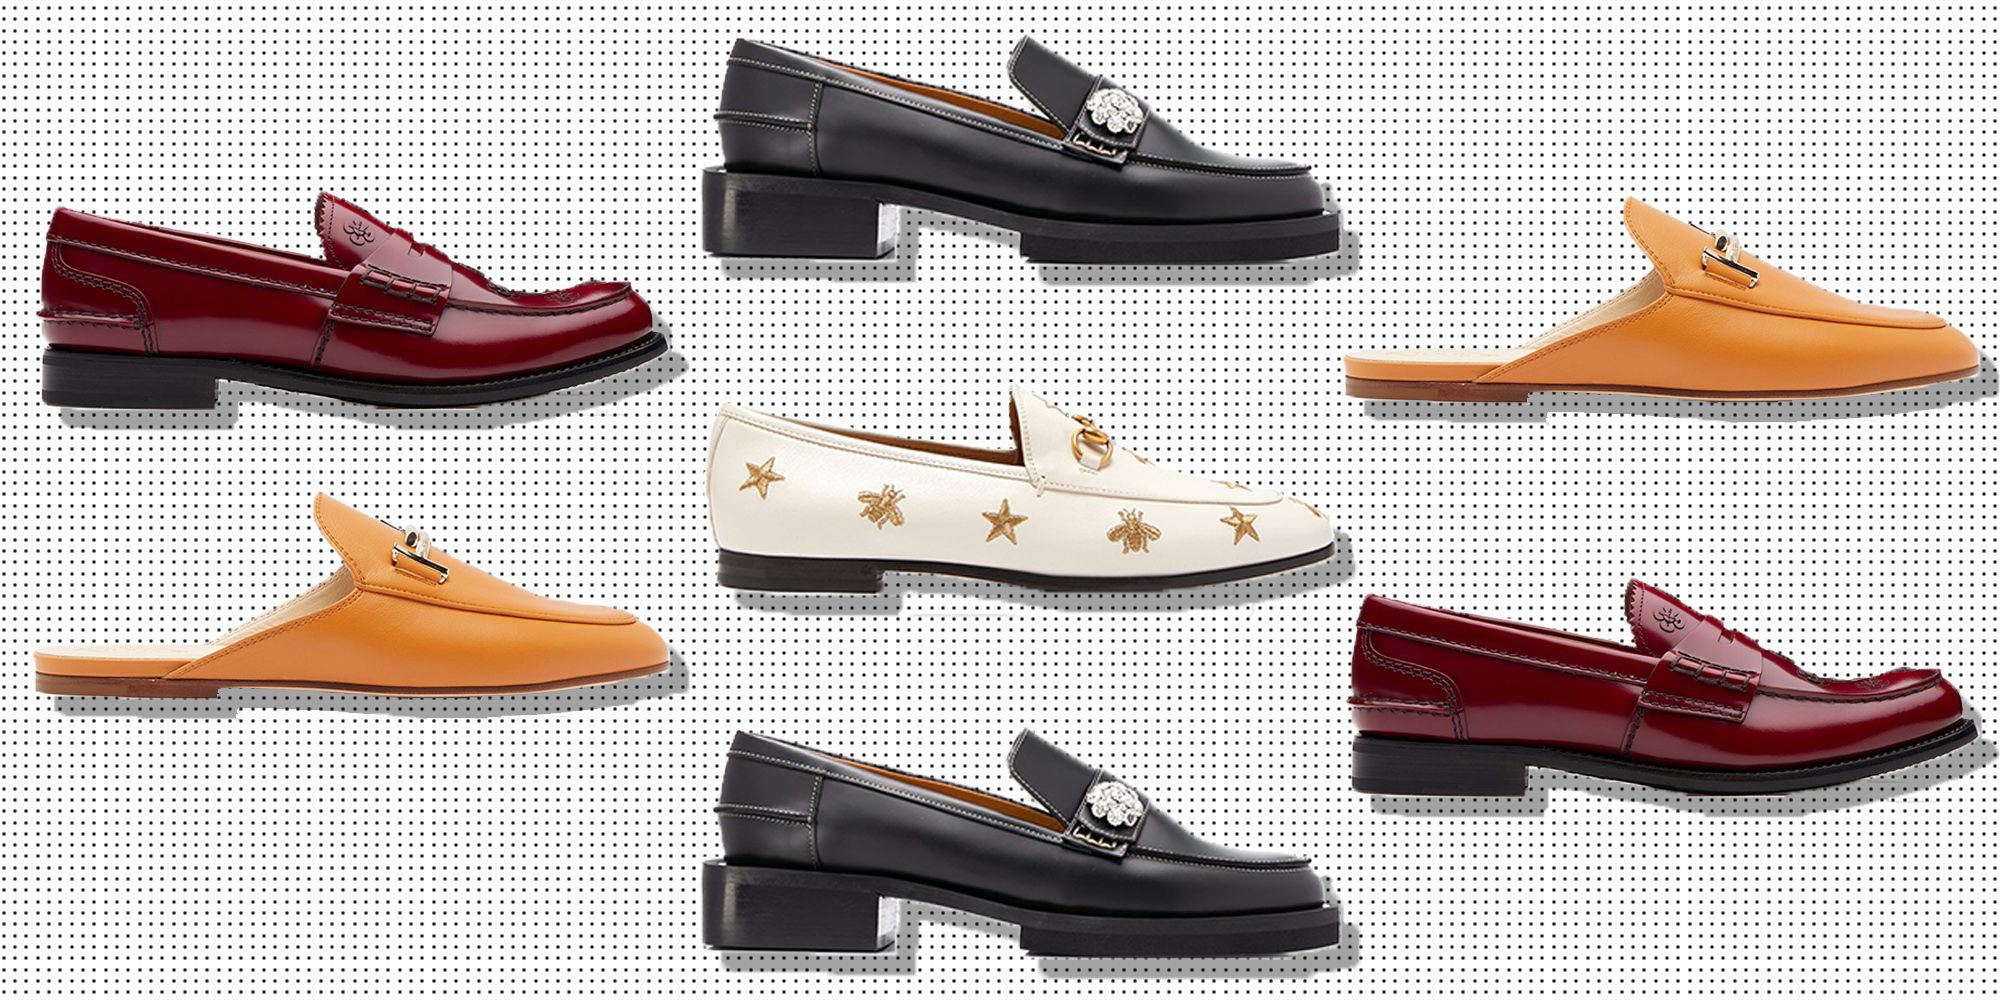 best everyday loafers